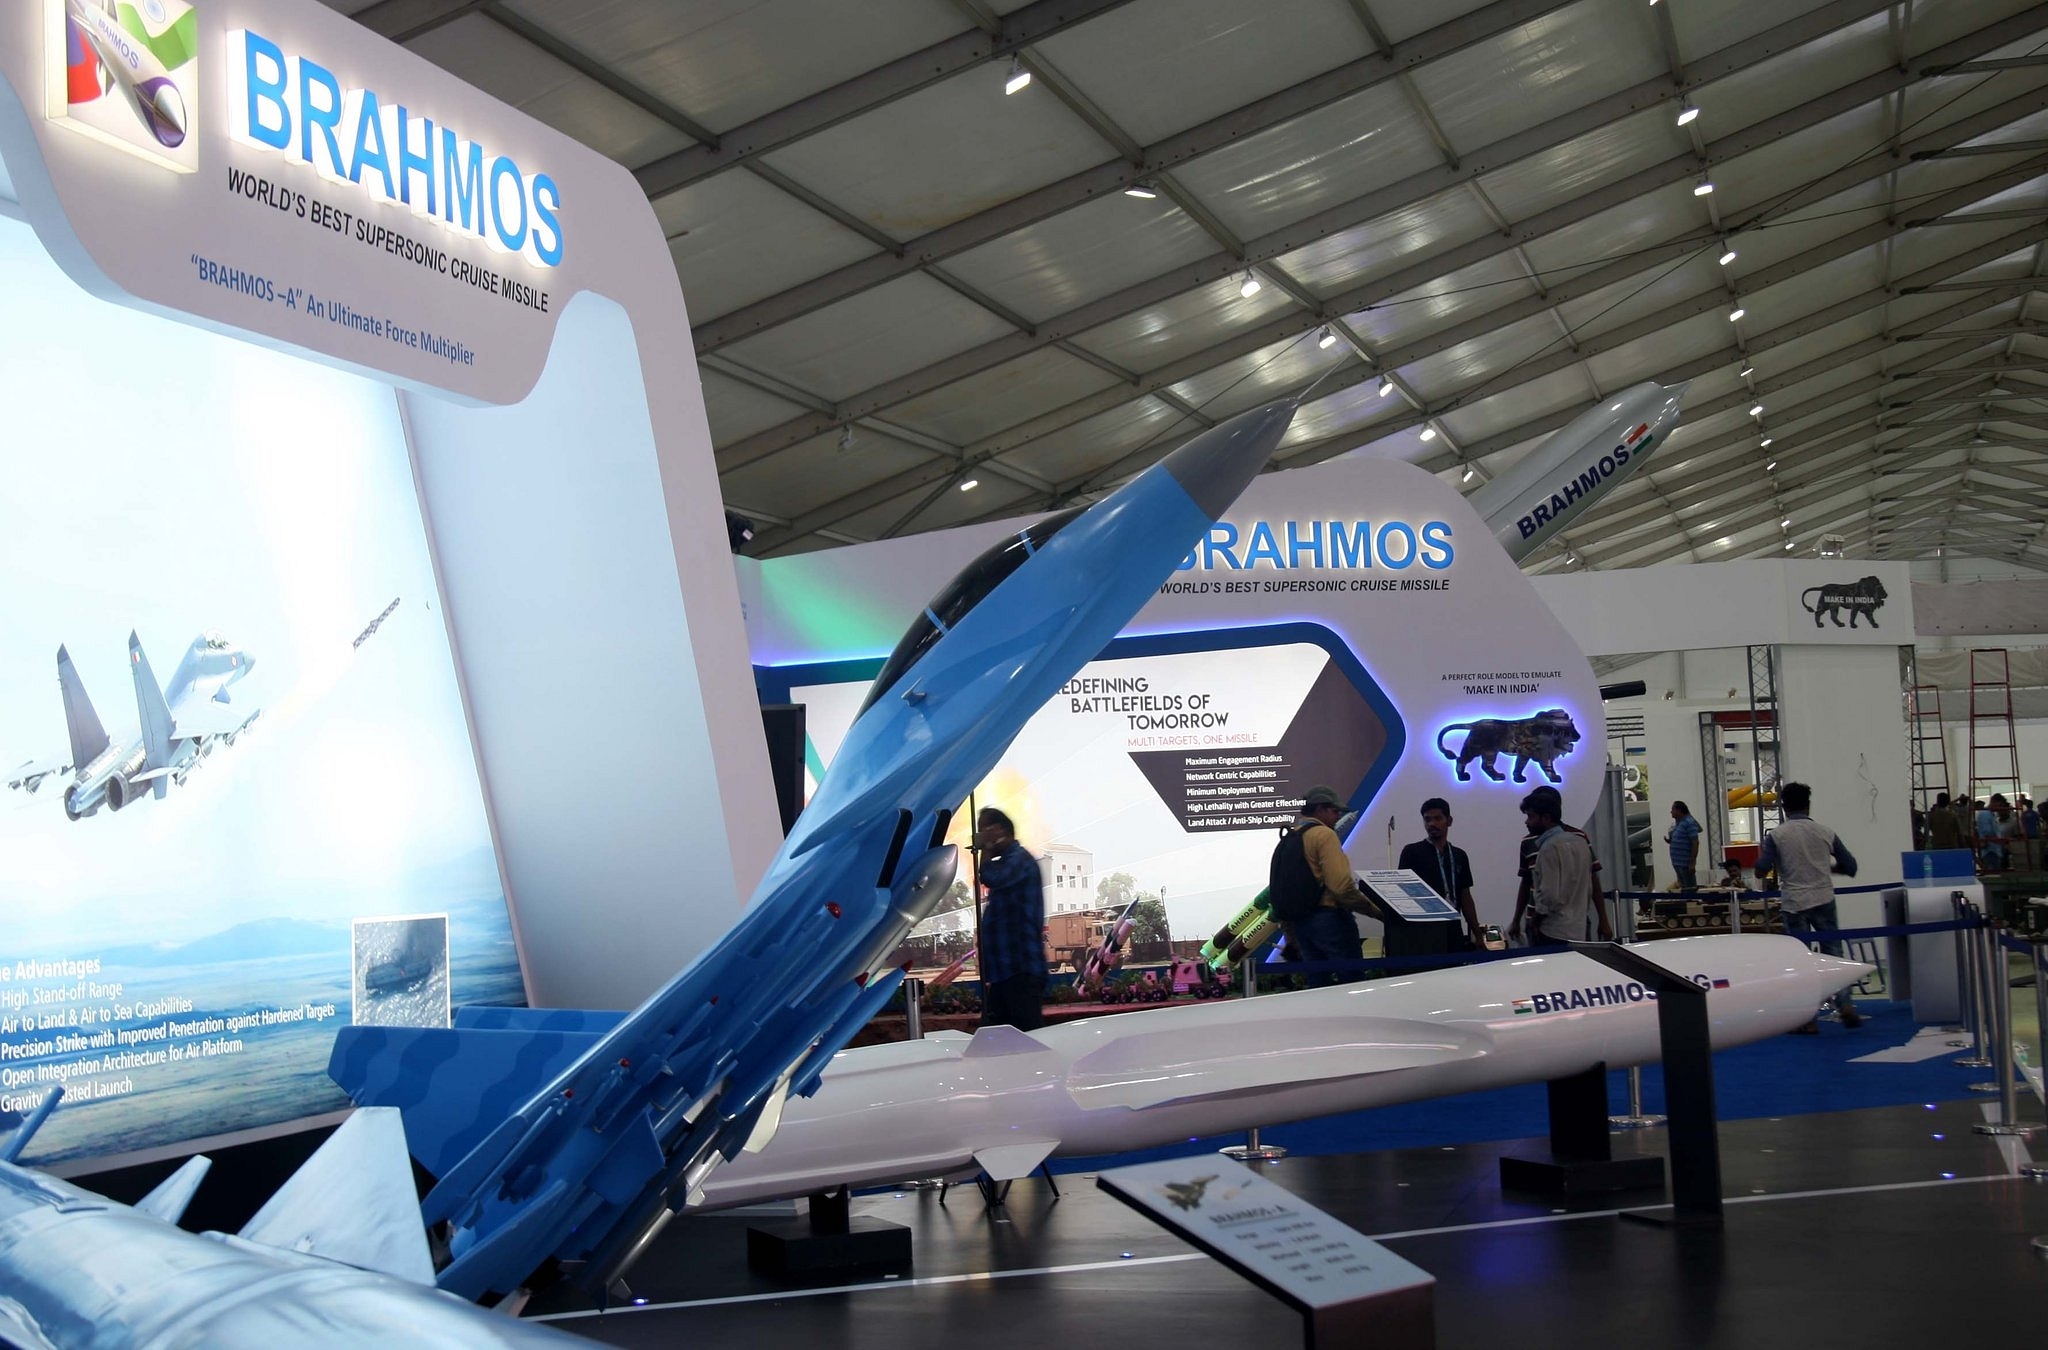 BrahMos Supersonic Cruise missile pavilion at Defence Expo. (Representative Image) (SpokespersonMoD/Twitter)